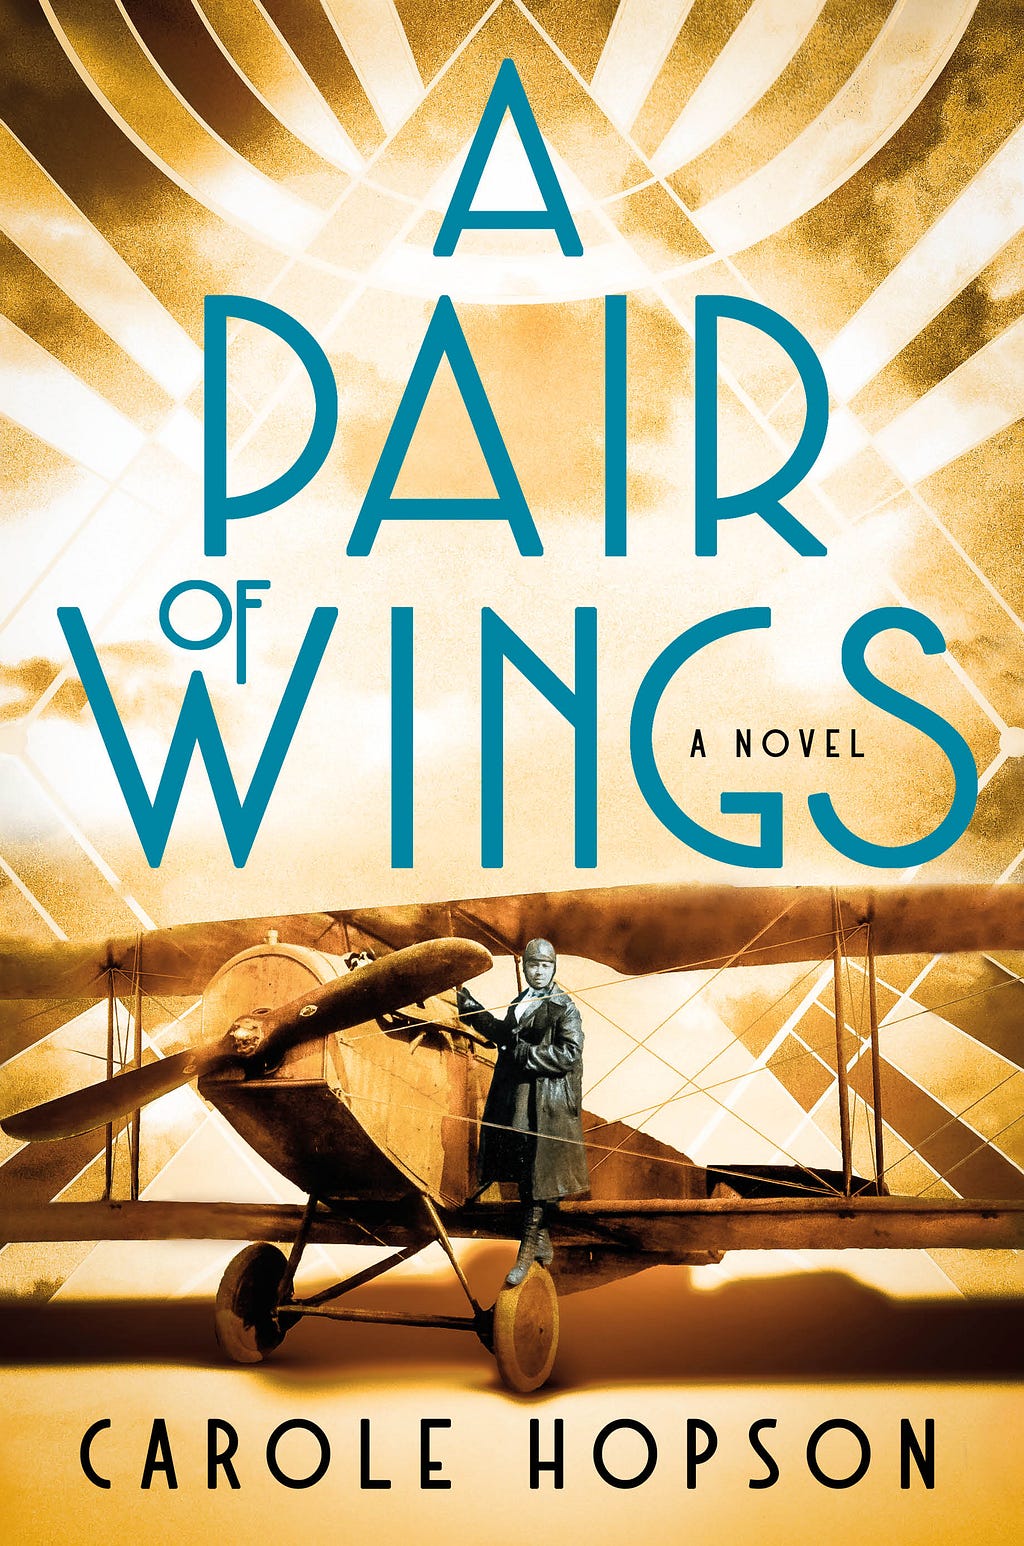 PDF A Pair of Wings By Carole Hopson